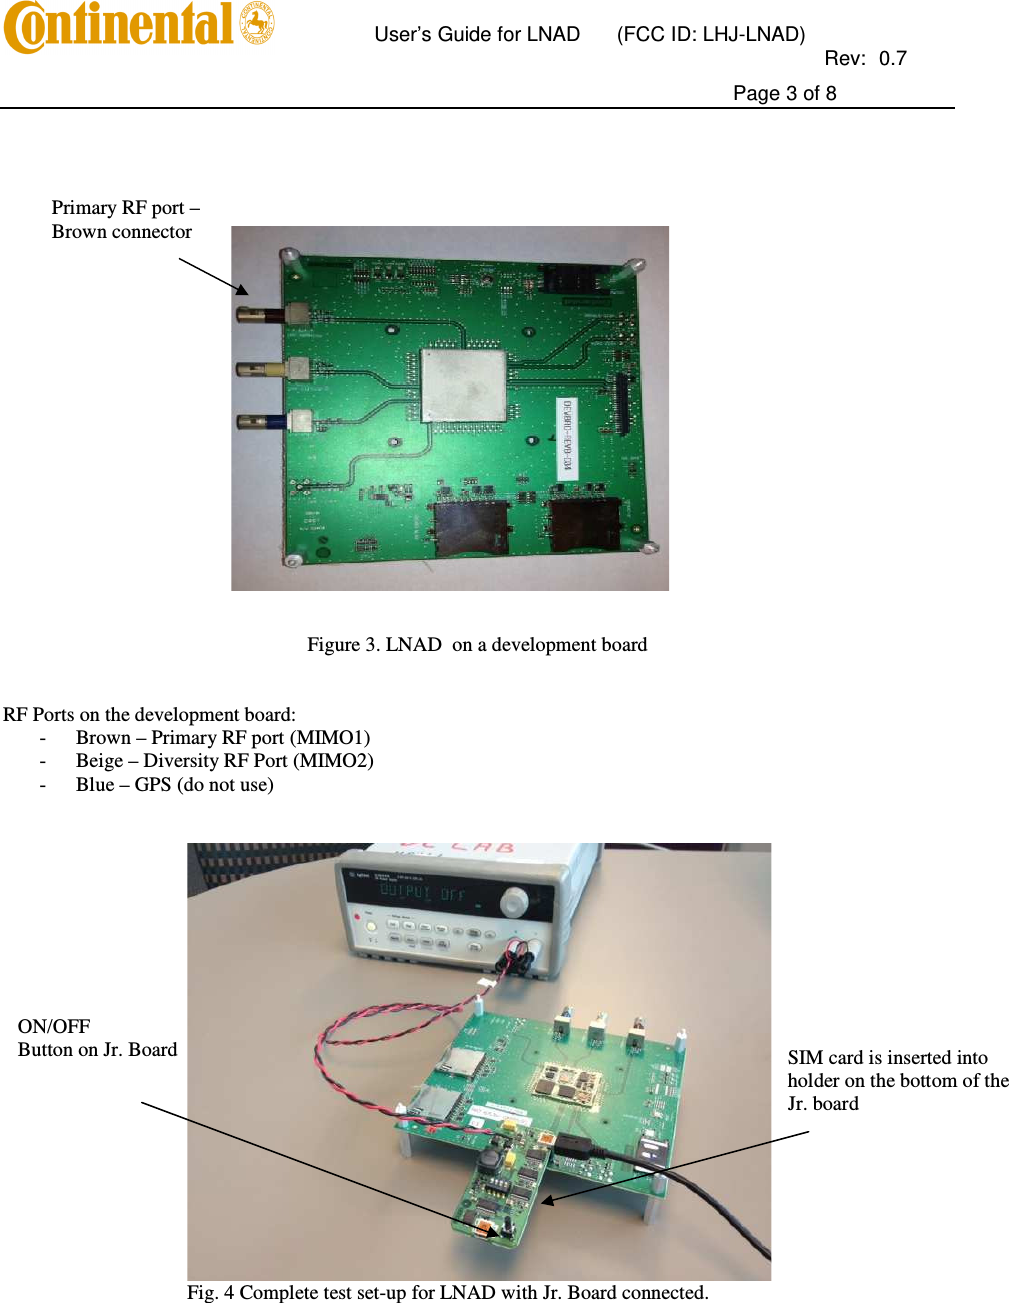       User’s Guide for LNAD  (FCC ID: LHJ-LNAD)          Rev:  0.7     Page 3 of 8     Figure 3. LNAD  on a development board   RF Ports on the development board: - Brown – Primary RF port (MIMO1) - Beige – Diversity RF Port (MIMO2) - Blue – GPS (do not use)    Fig. 4 Complete test set-up for LNAD with Jr. Board connected.   Primary RF port –  Brown connector ON/OFF  Button on Jr. Board  SIM card is inserted into holder on the bottom of the Jr. board 